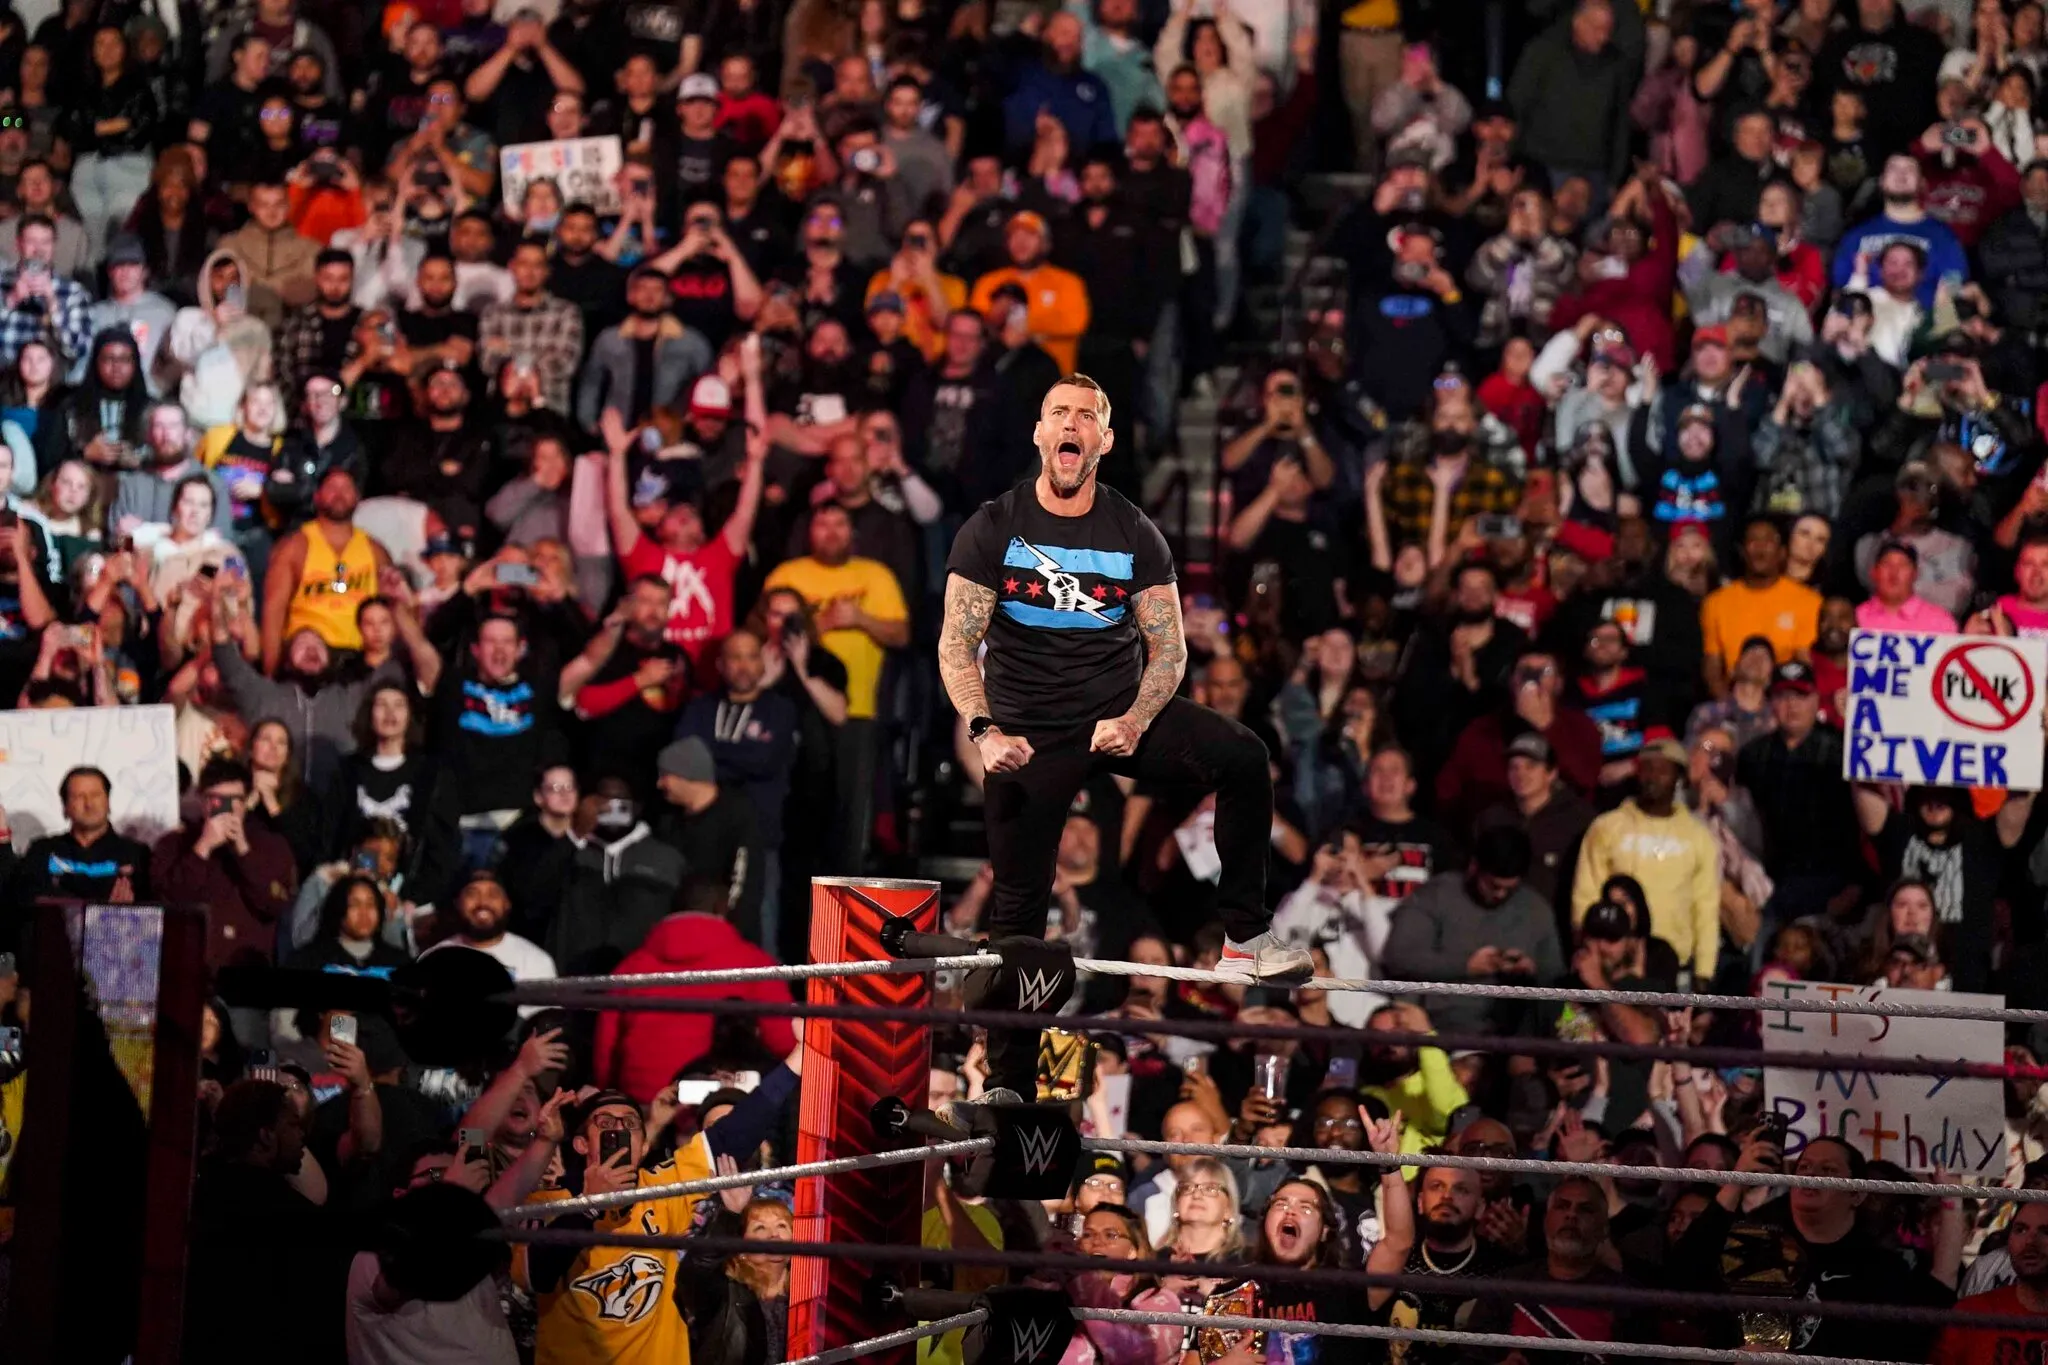 The Electrifying Return of CM Punk to WWE RAW: A Night to Remember